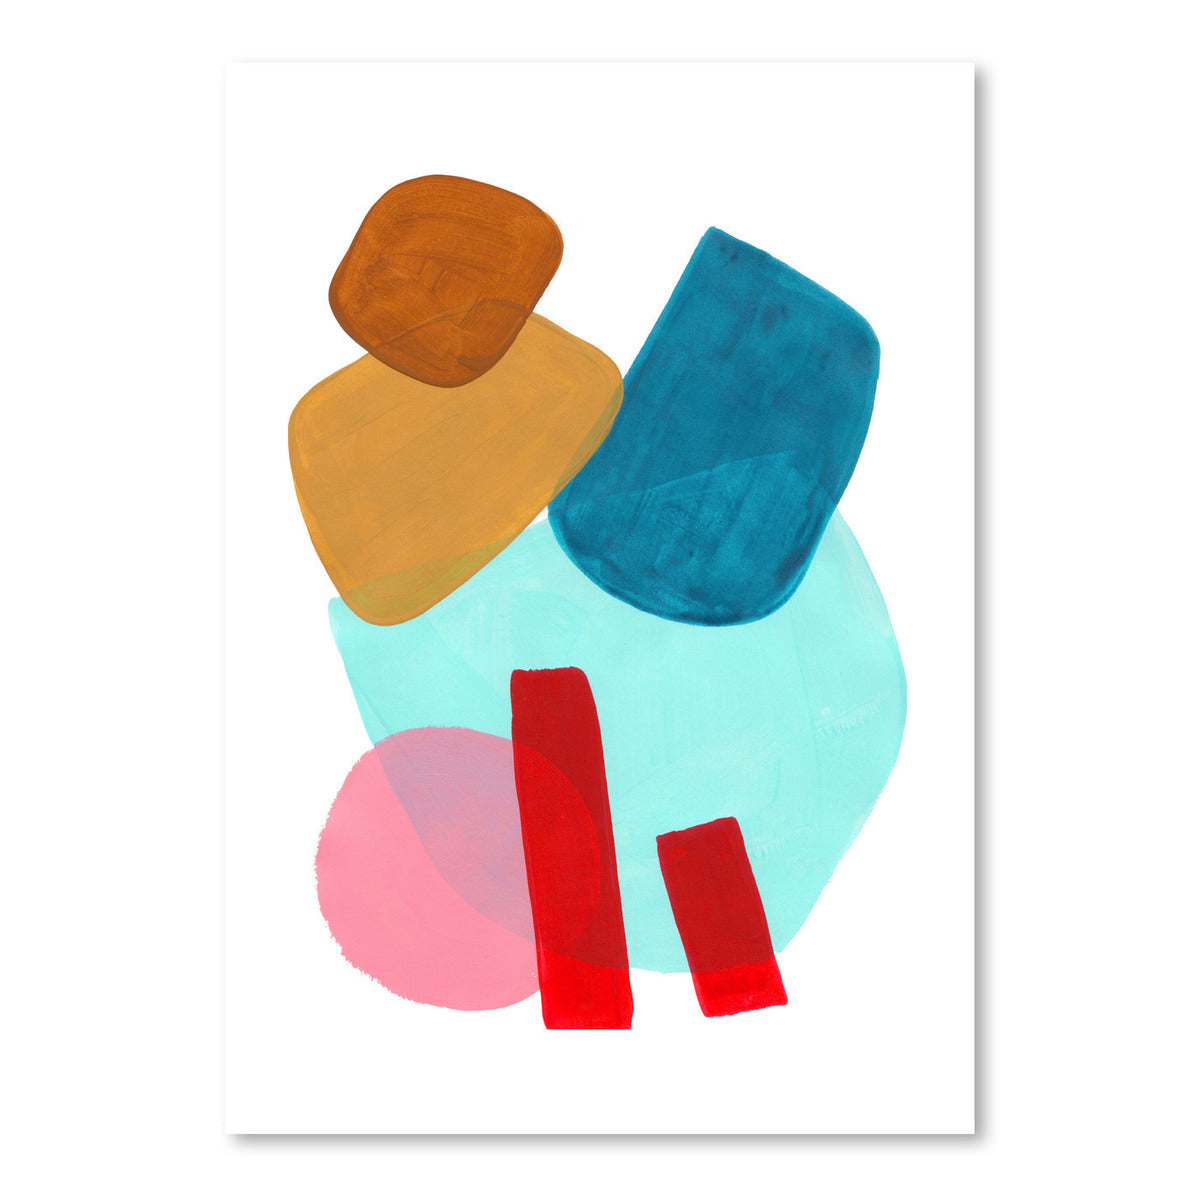 Playful Pastel Pink Yellow Teal Shapes by Ejaaz Haniff - Art Print - Americanflat